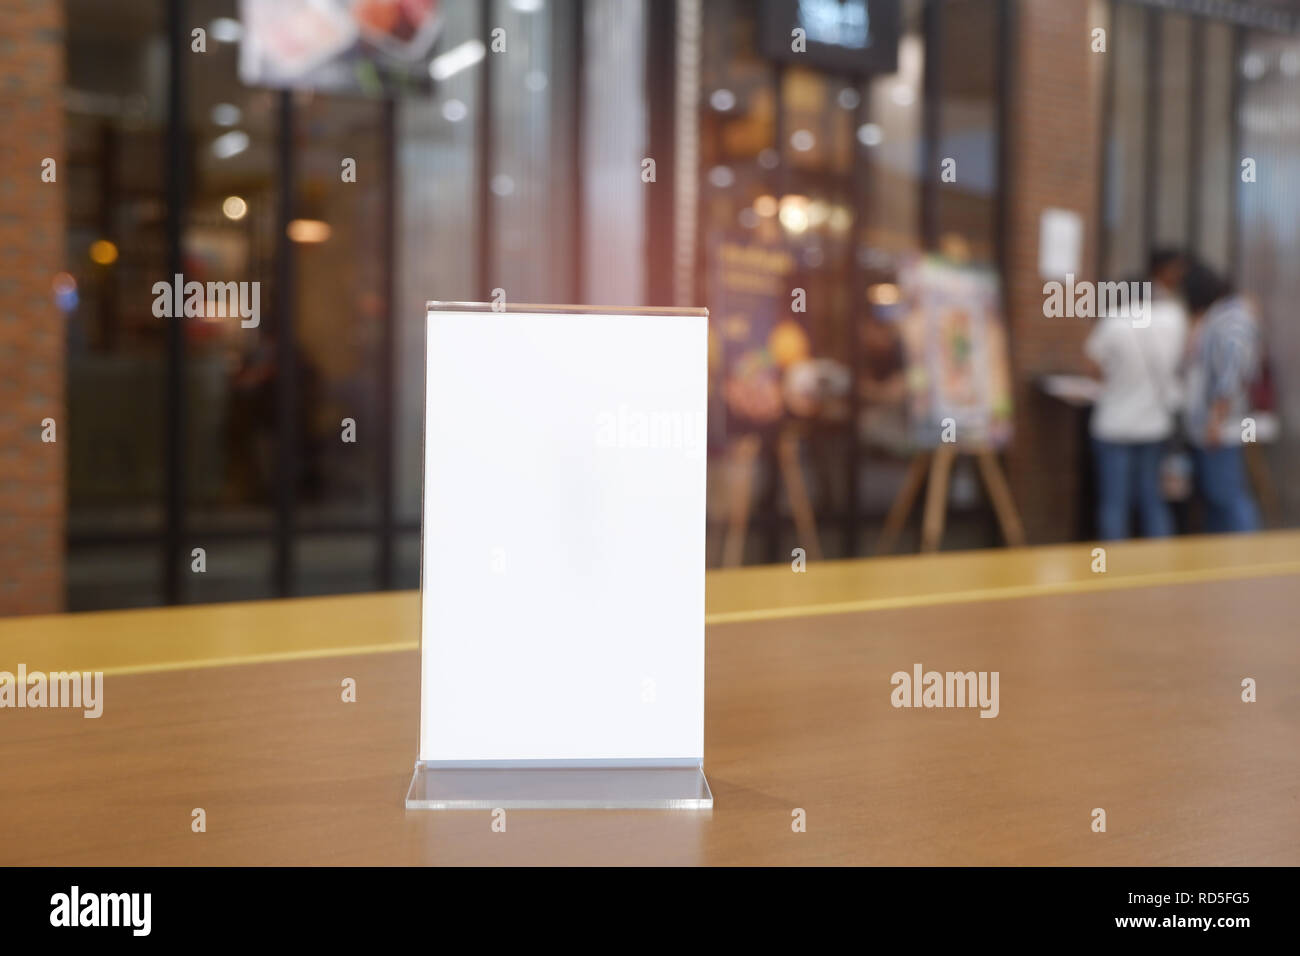 Menu frame standing on wood table in Bar restaurant cafe. space for text marketing promotion - Image Stock Photo